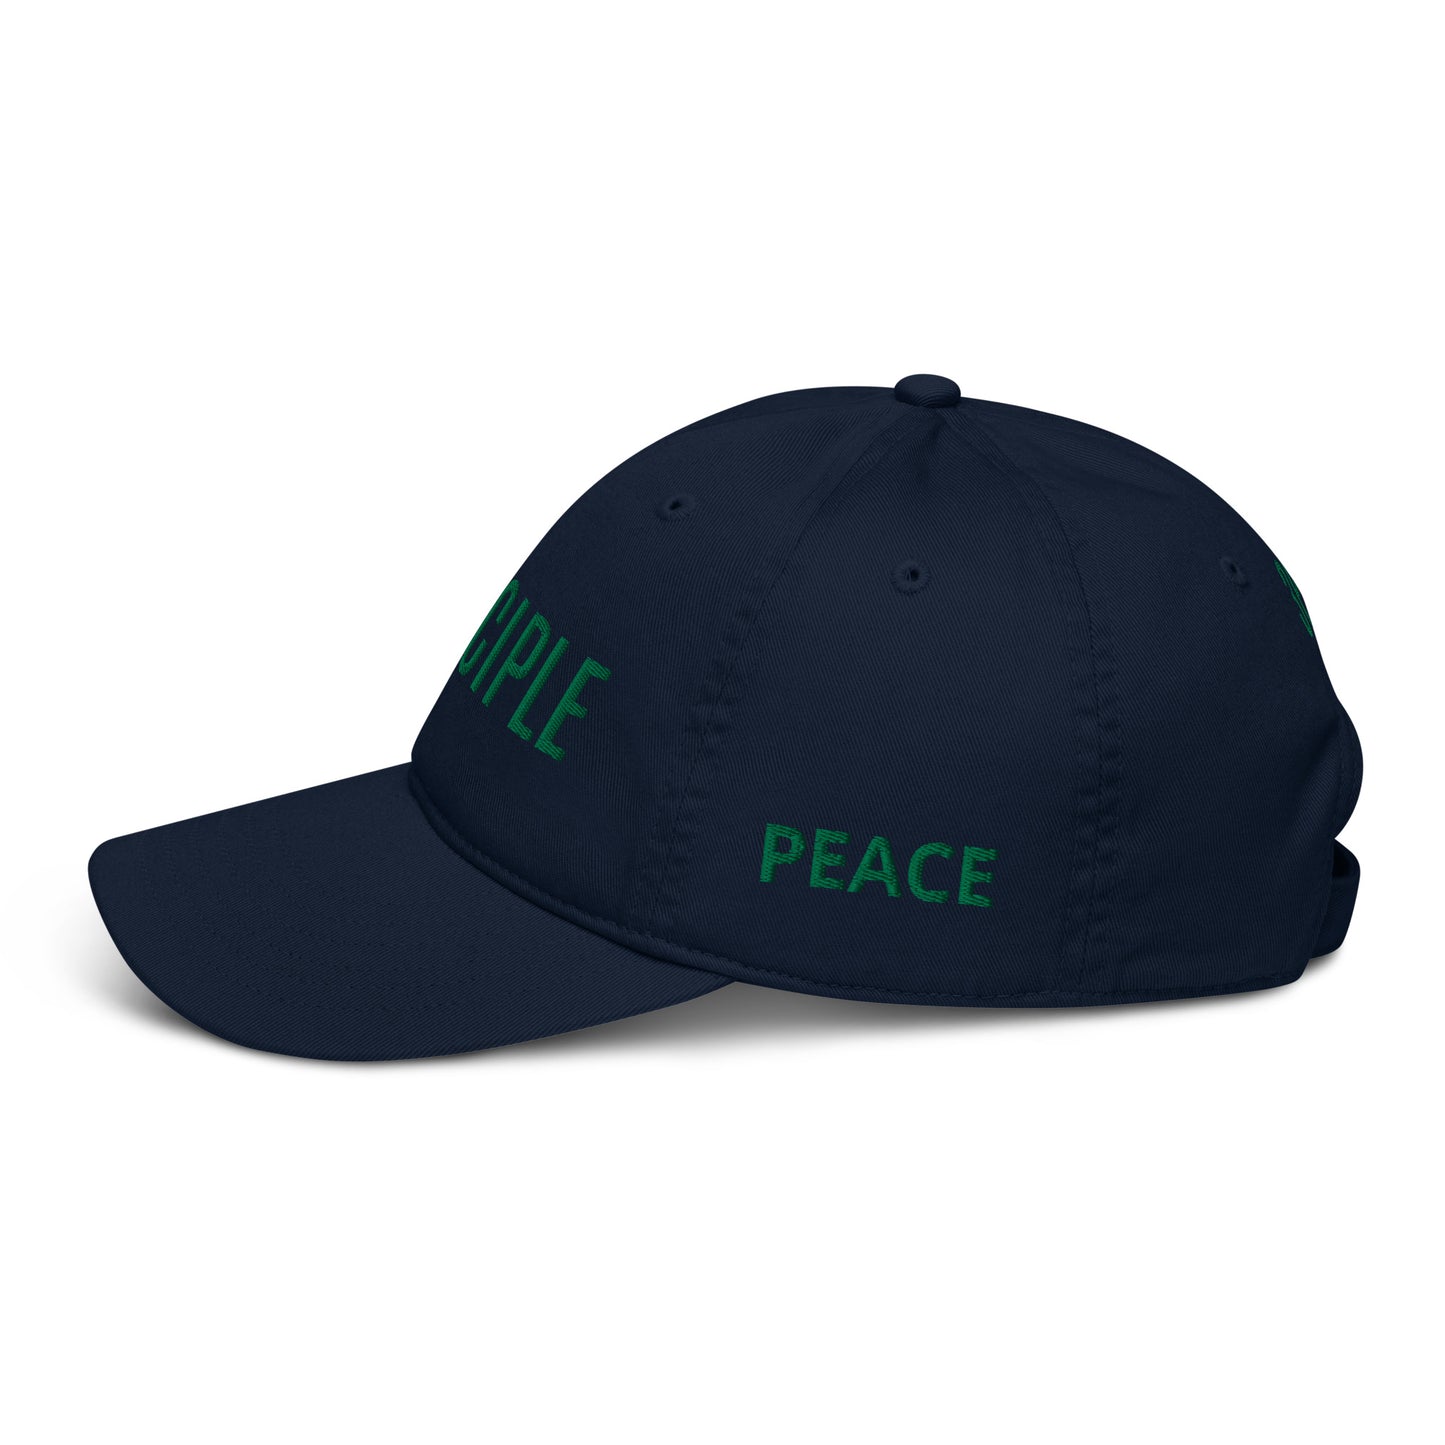 IN THE ABSENCE OF FEAR ORGANIC DAD HAT